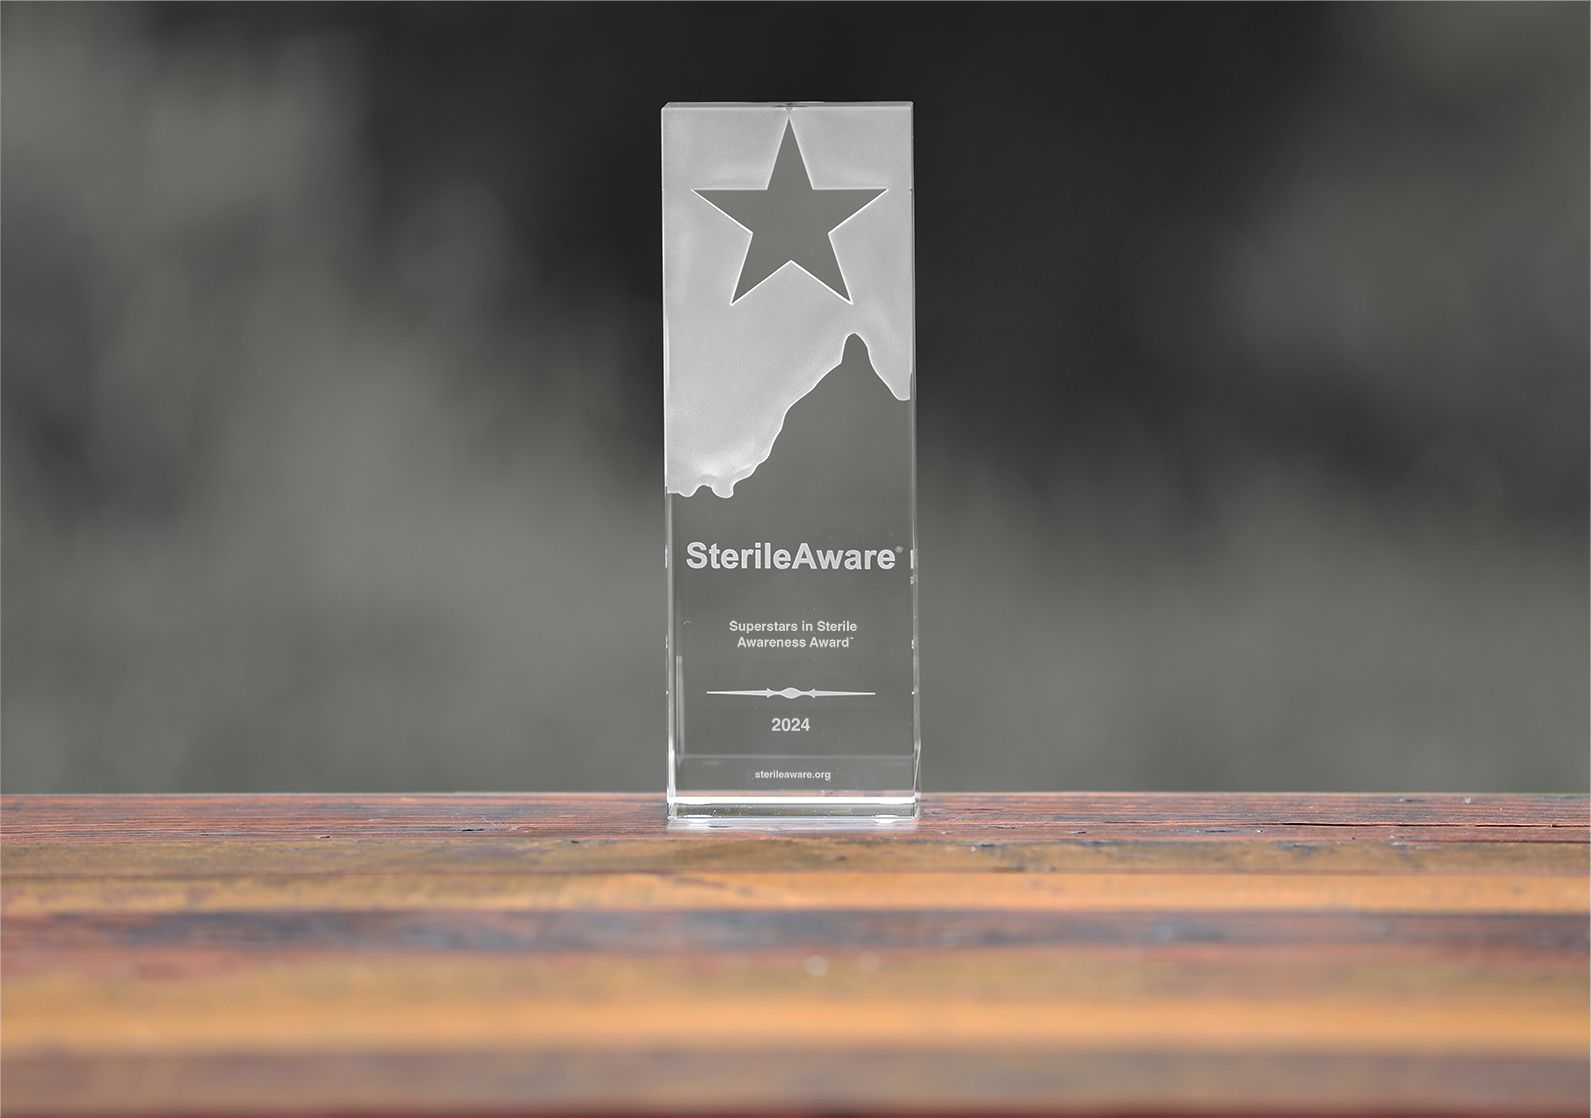 Superstars in Sterile Processing and Packaging award